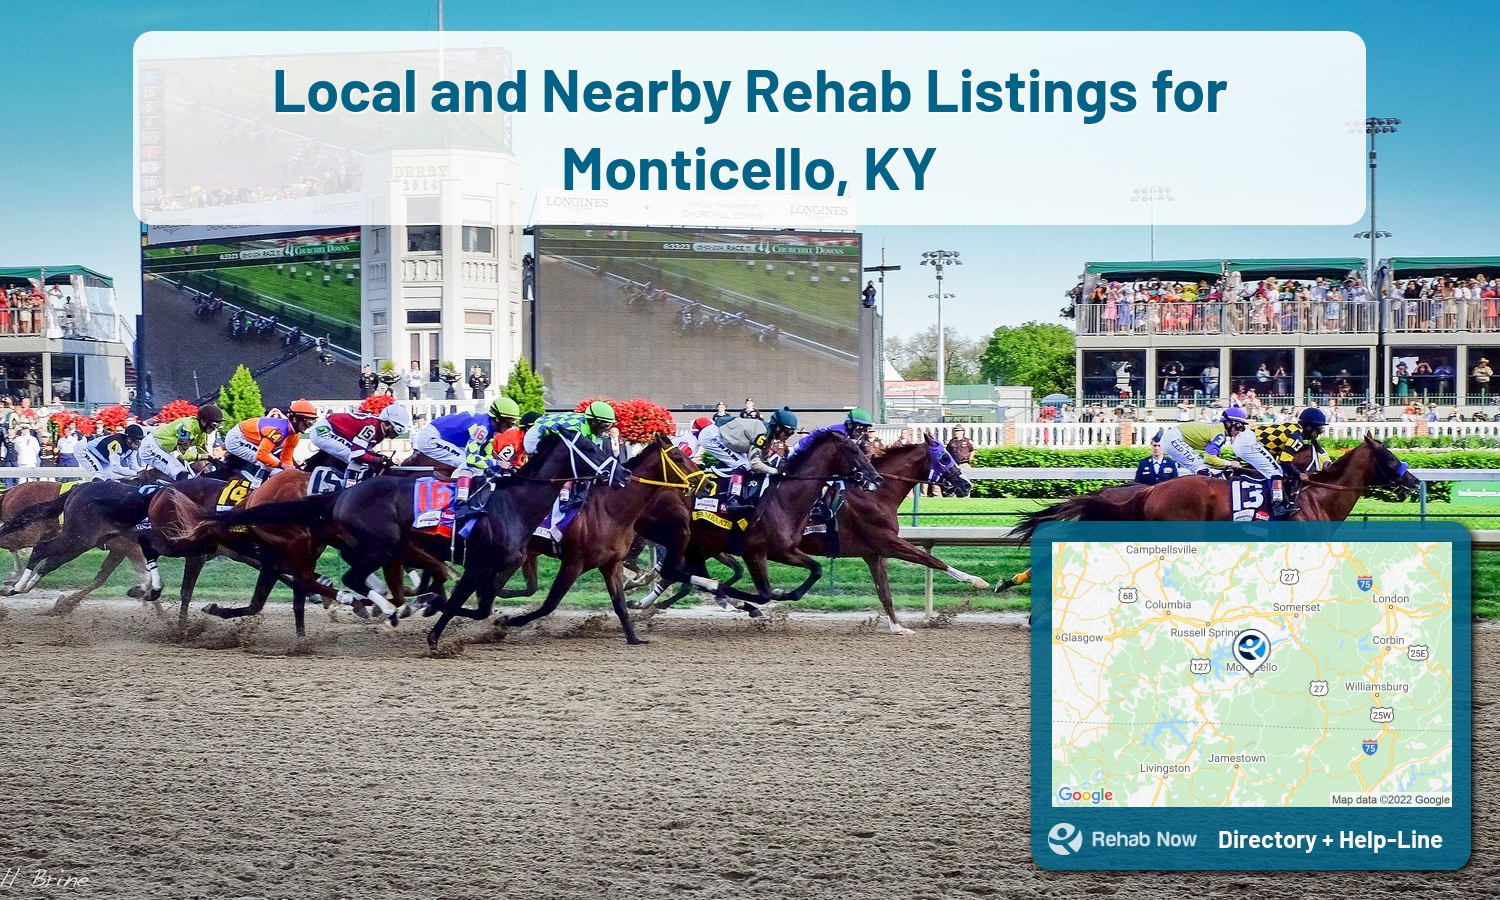 Monticello, KY Treatment Centers. Find drug rehab in Monticello, Kentucky, or detox and treatment programs. Get the right help now!